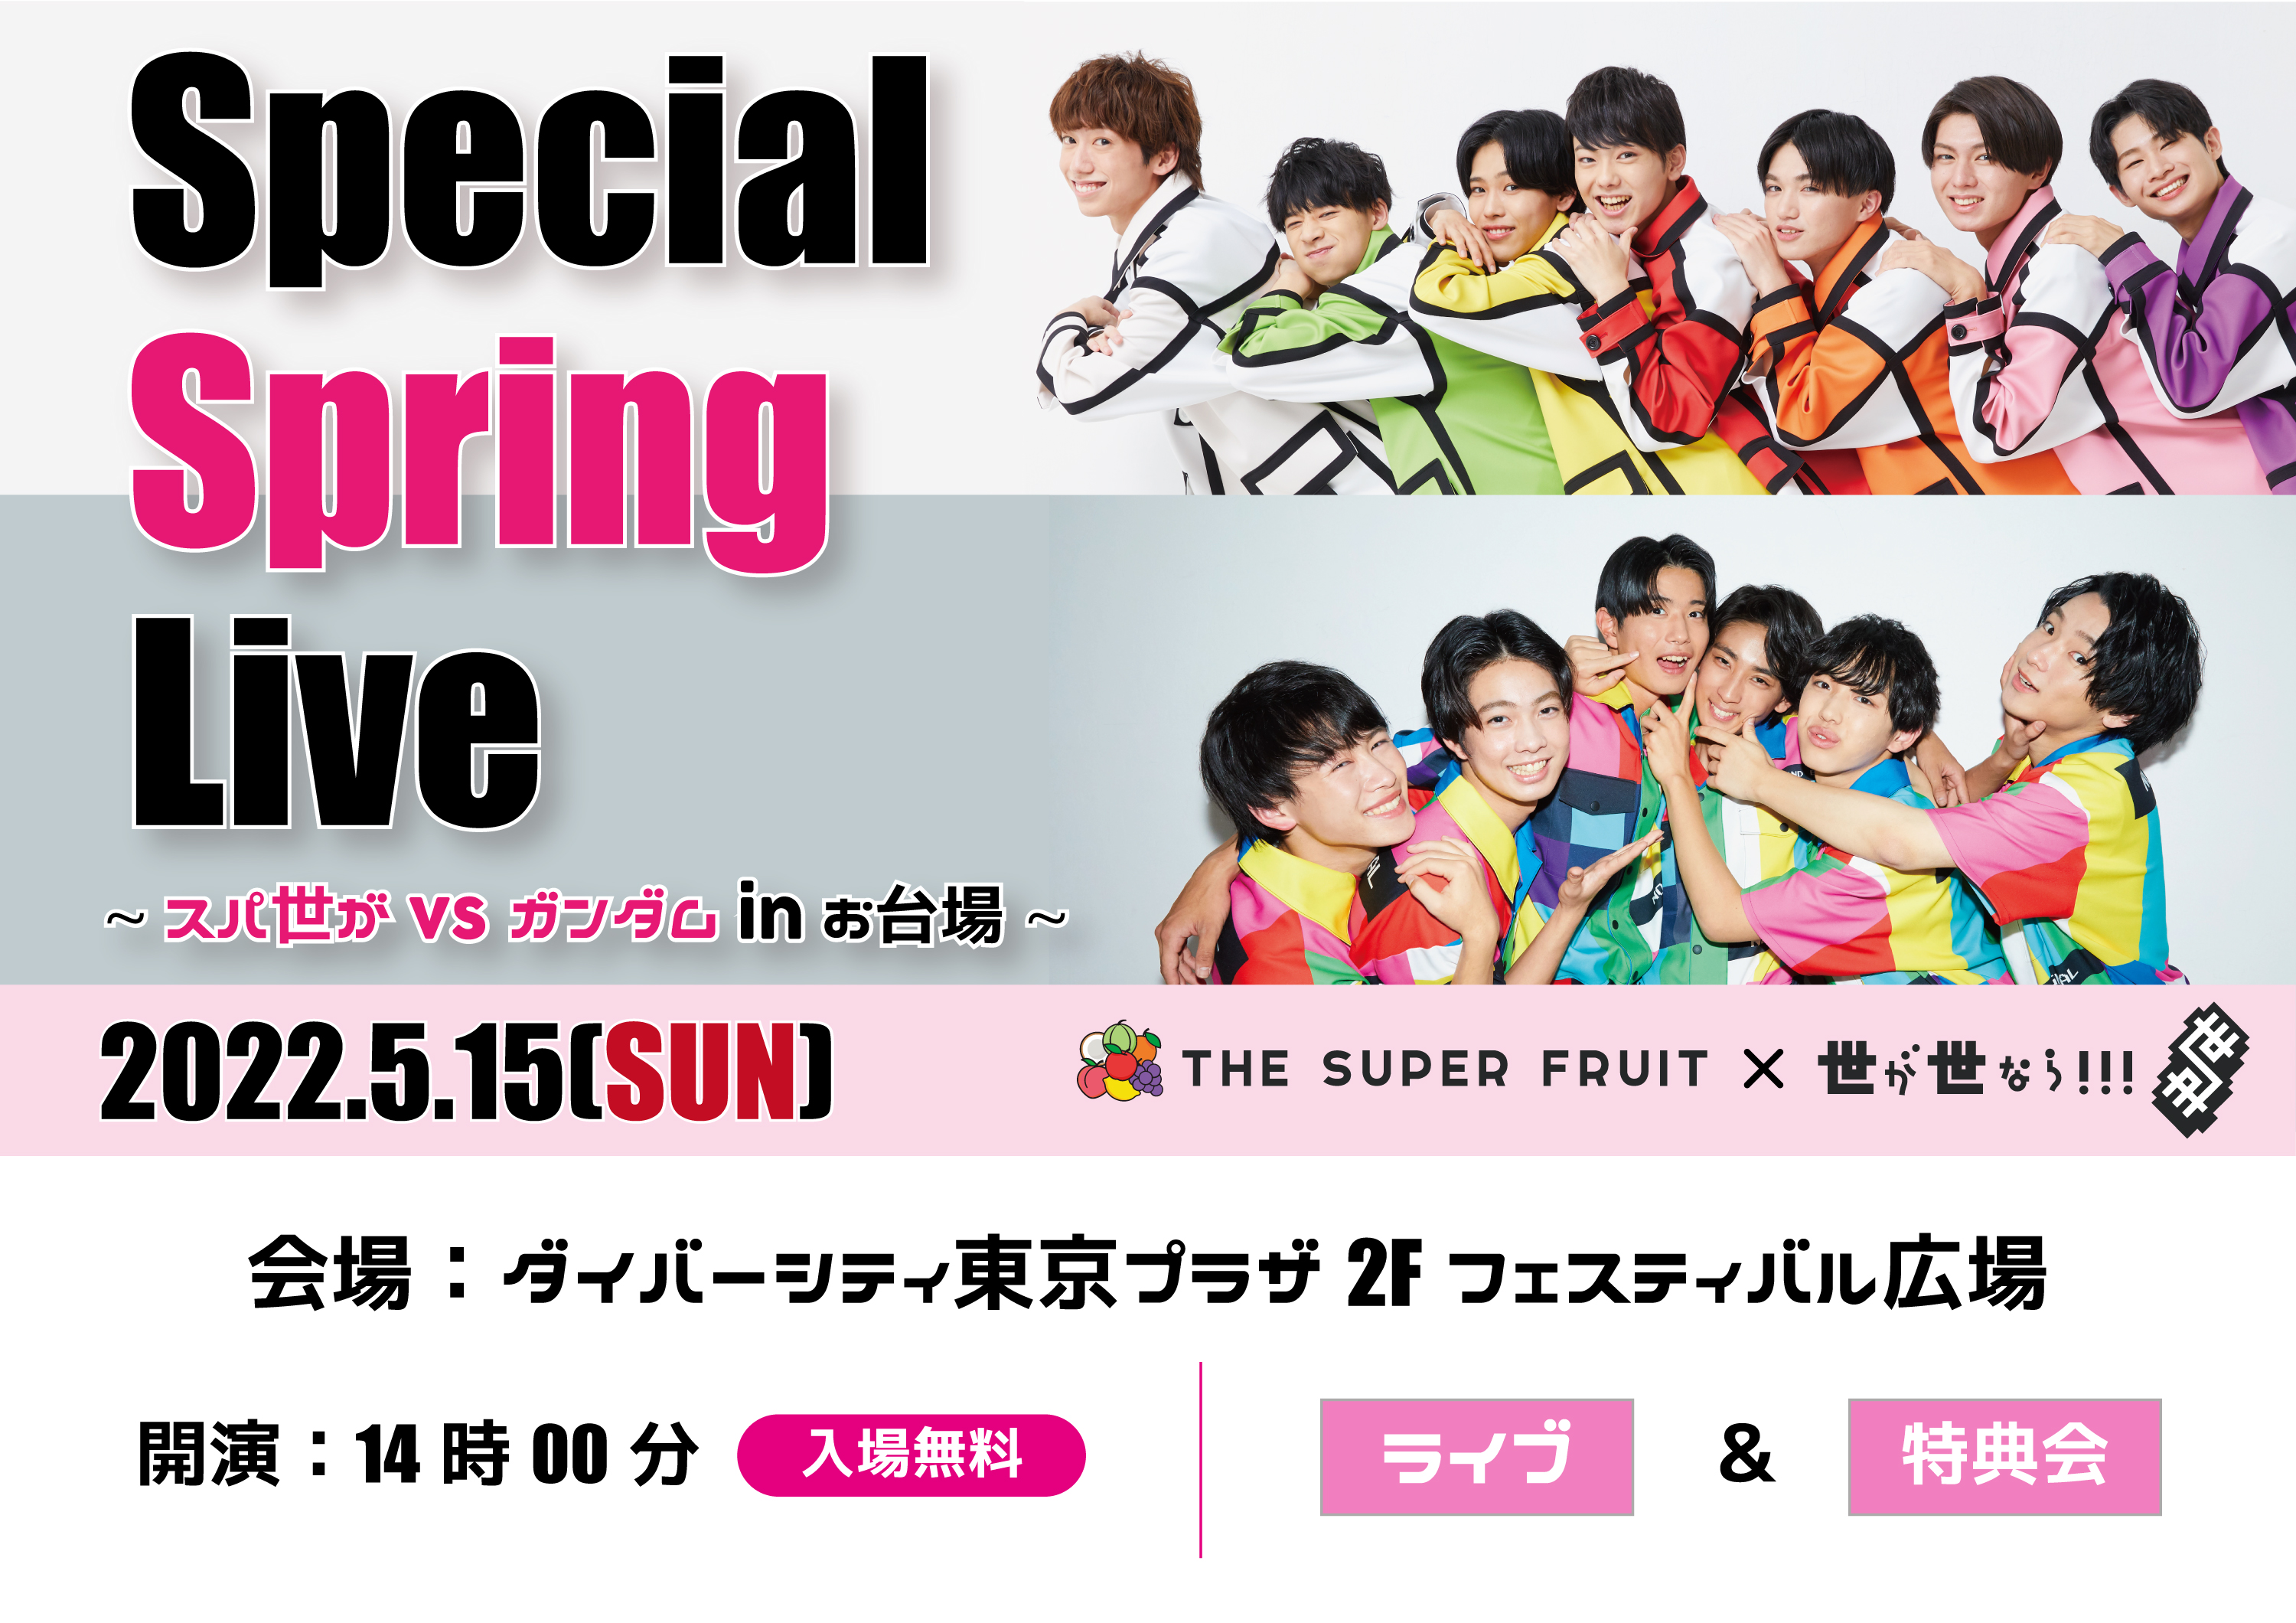 【NEWS】5月15日(日)に「THE SUPER FRUIT×世が世なら!!!　 Special Spring Live 〜スパ世が vs ガンダムinお台場〜」開催決定！